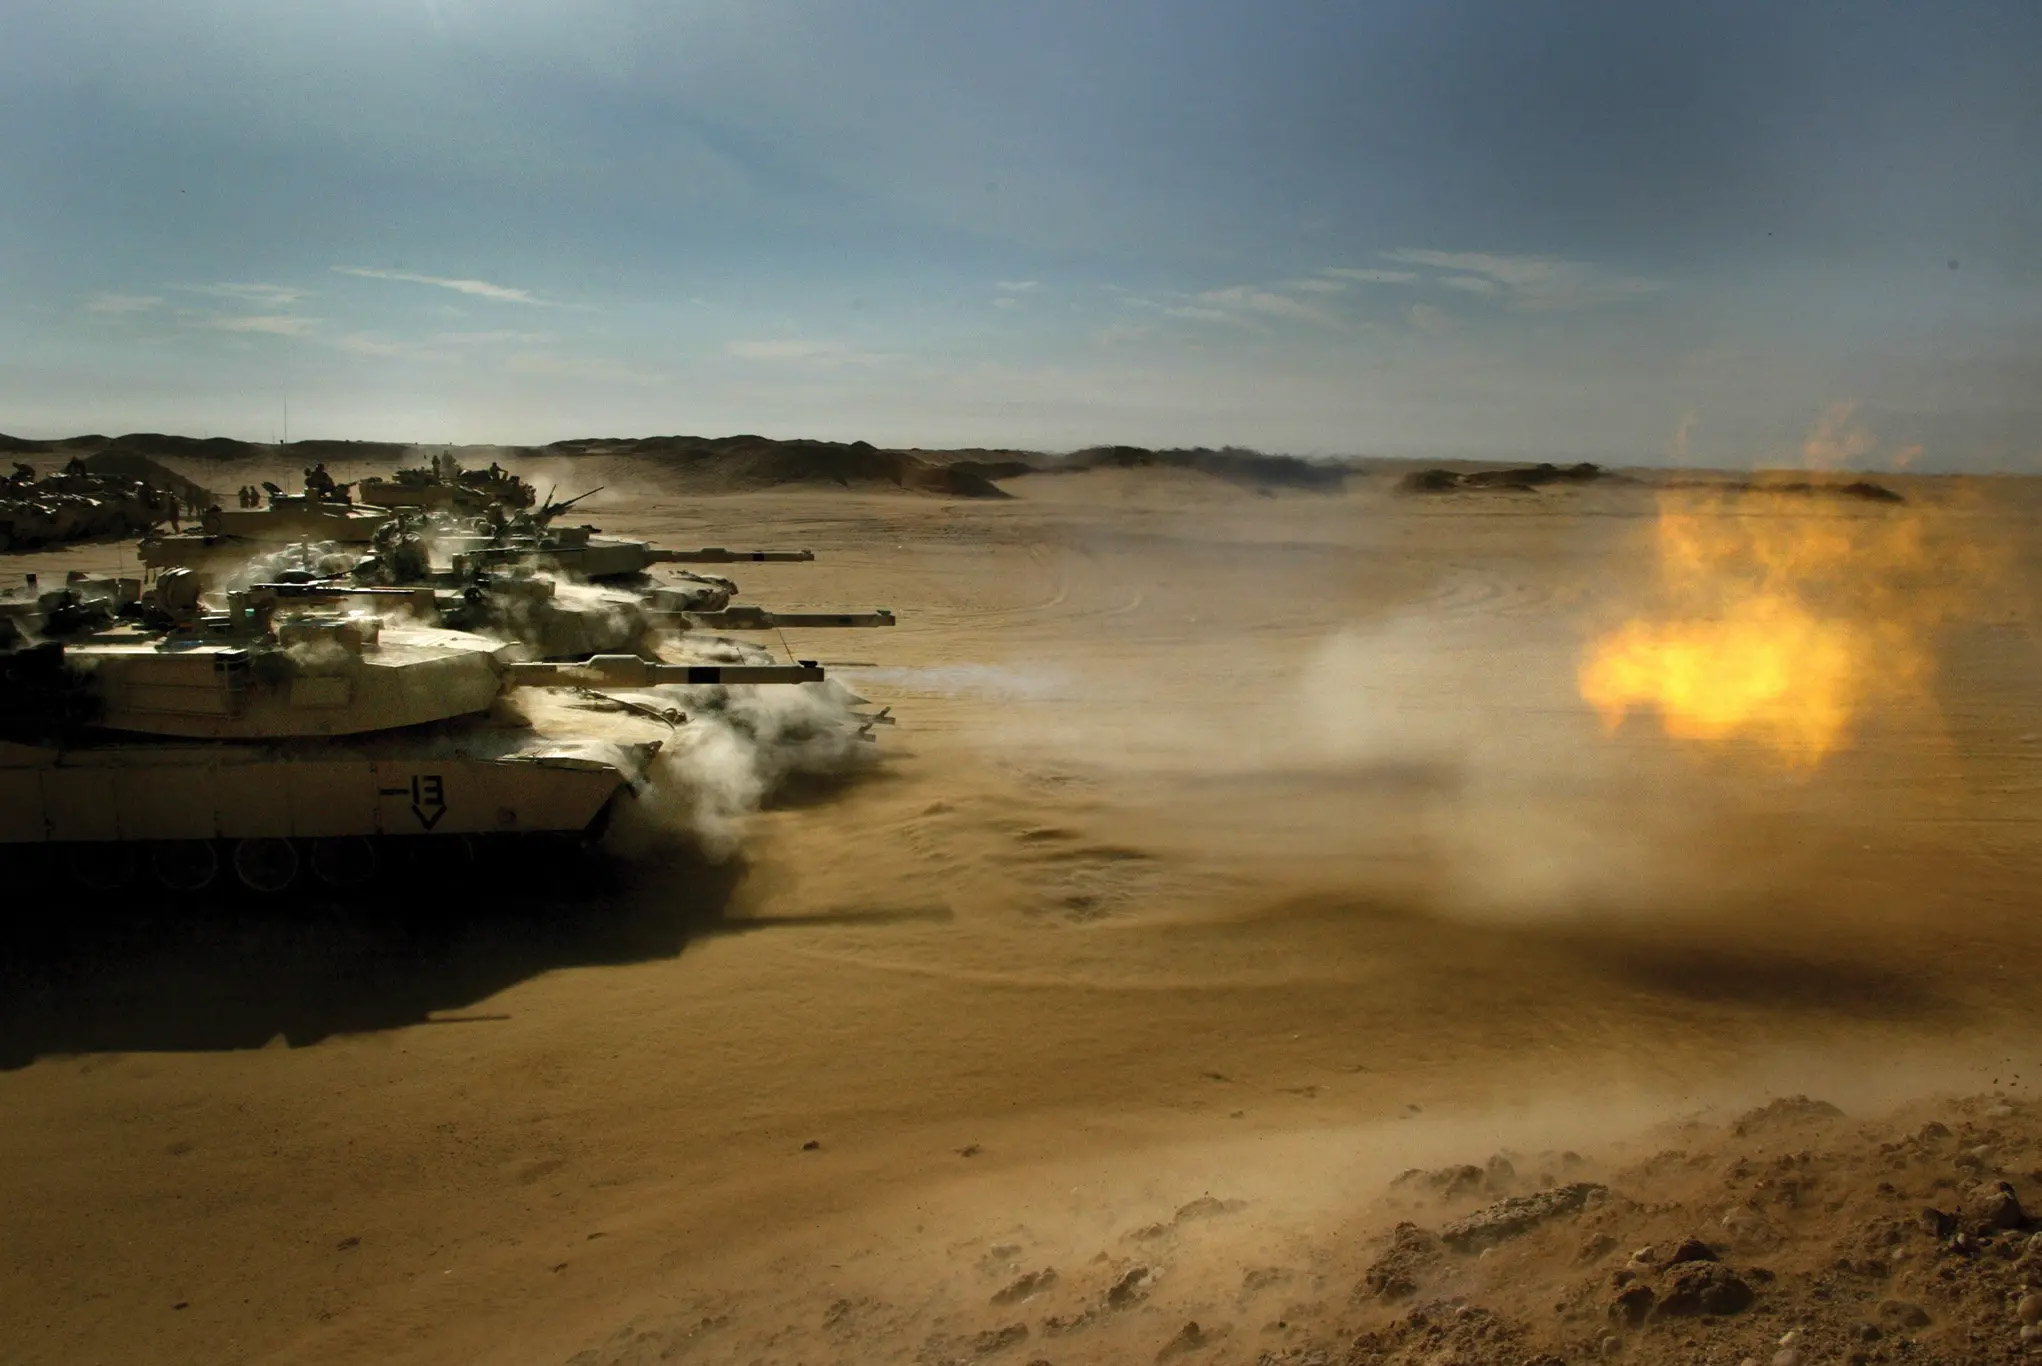 3rd Infantry Division M1A1 tanks firing at the Udari Range Complex in Kuwait